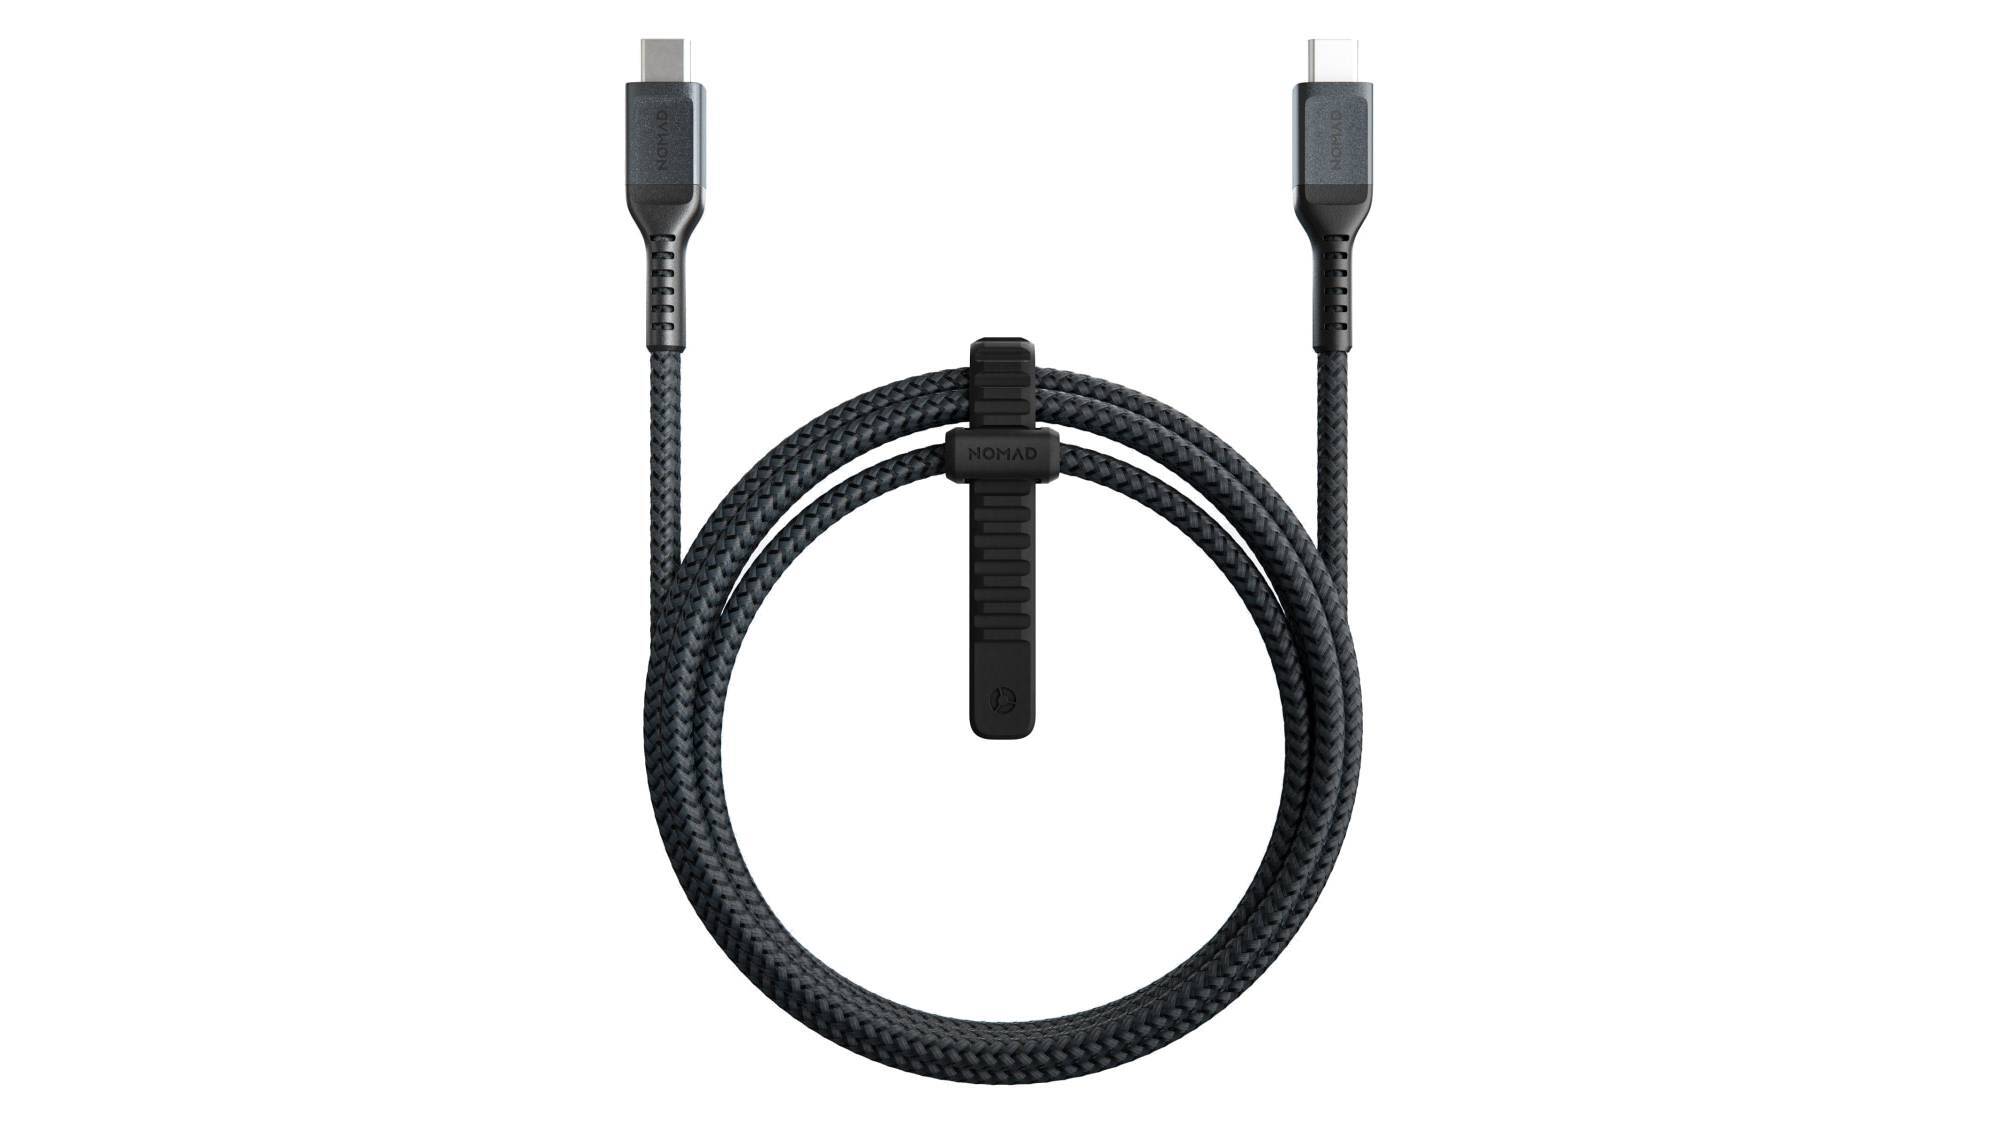 Award Winning USB Cables, USB C Cables, Type C Cables and more -  Comprehensive